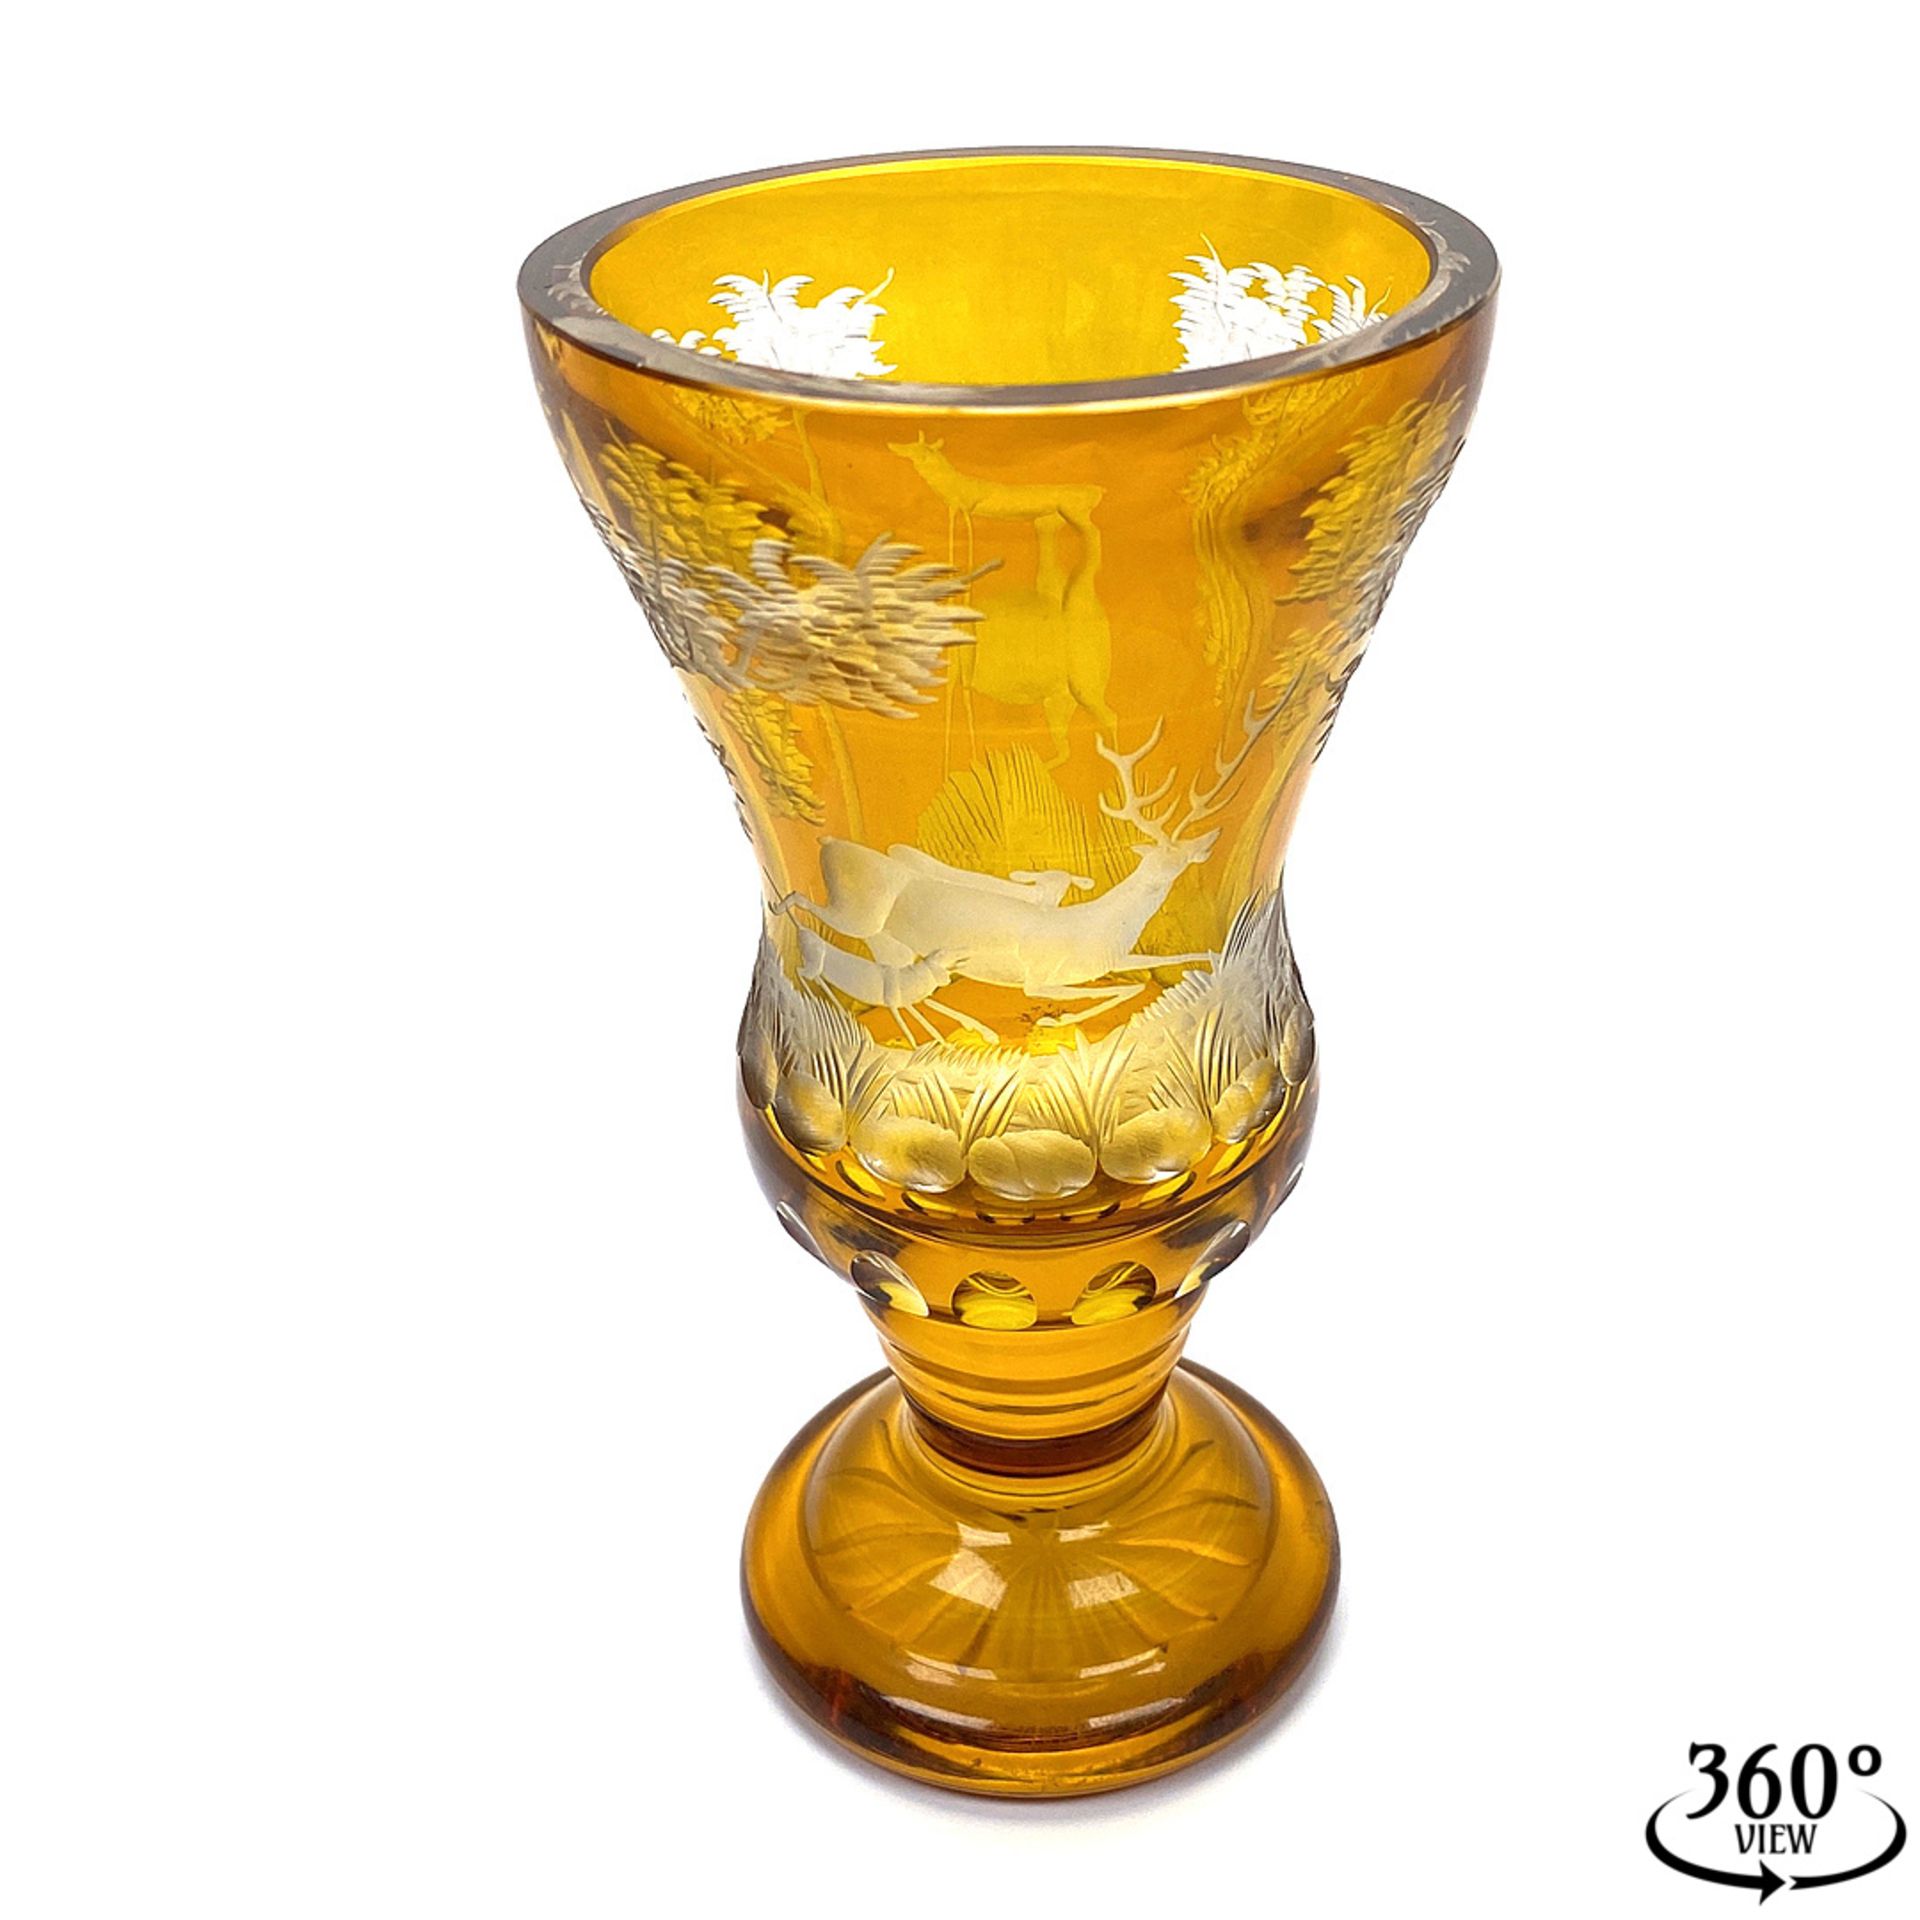 Footed cup, 19th/20th century